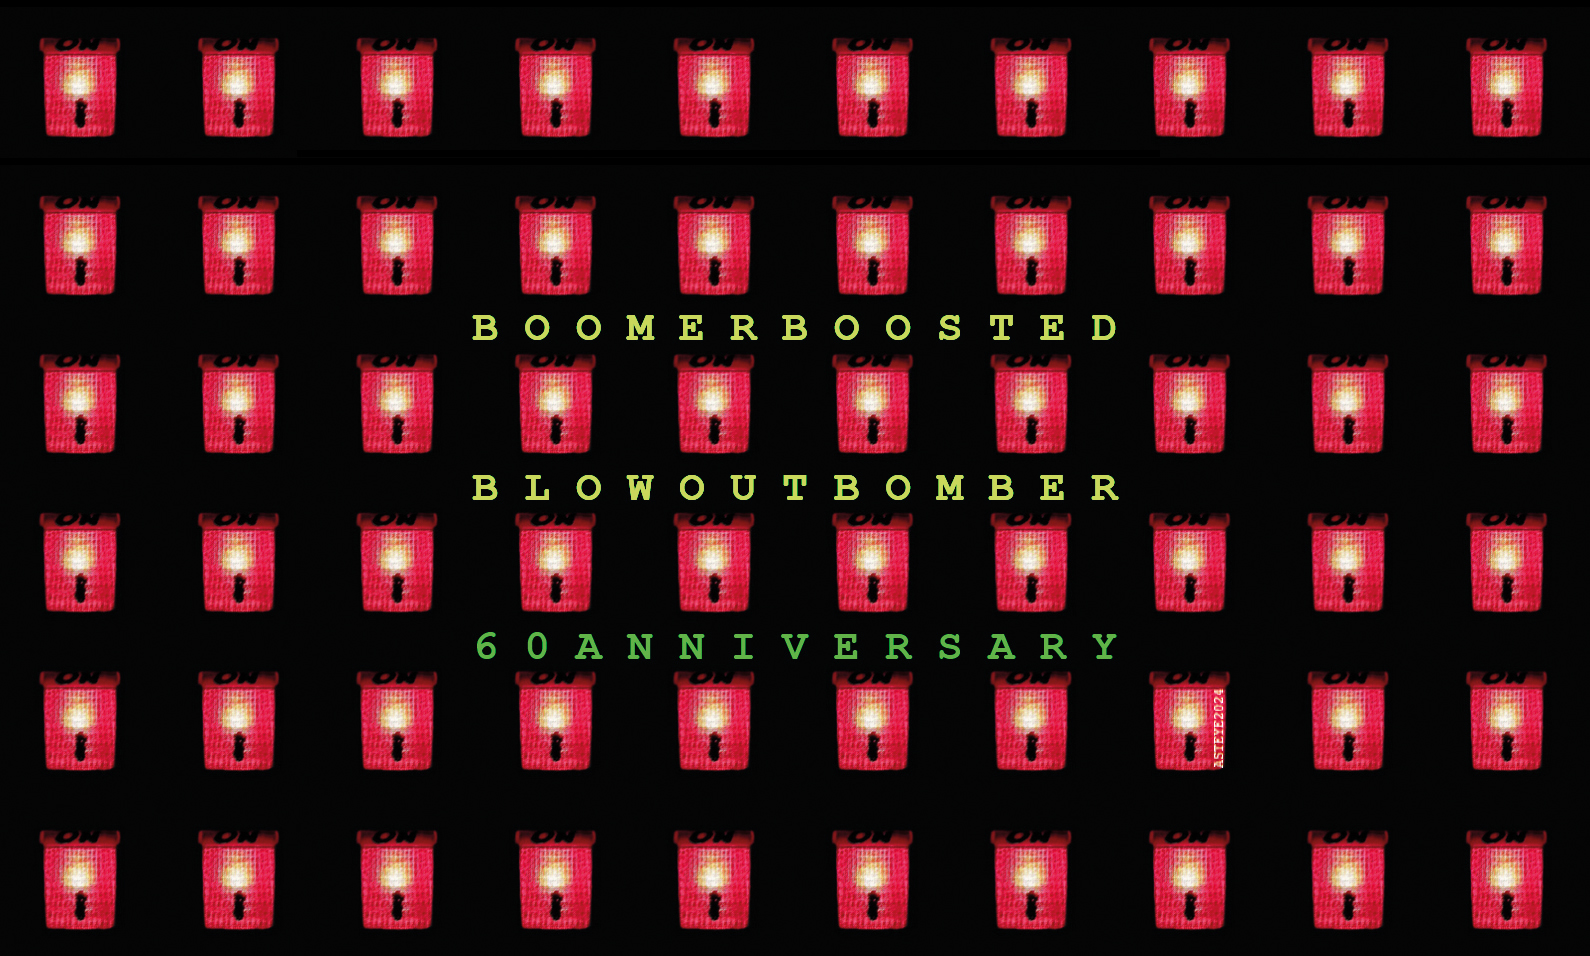 Boomer Boosted Blowout Bomber, 60 chart, ASTEYE 20240415